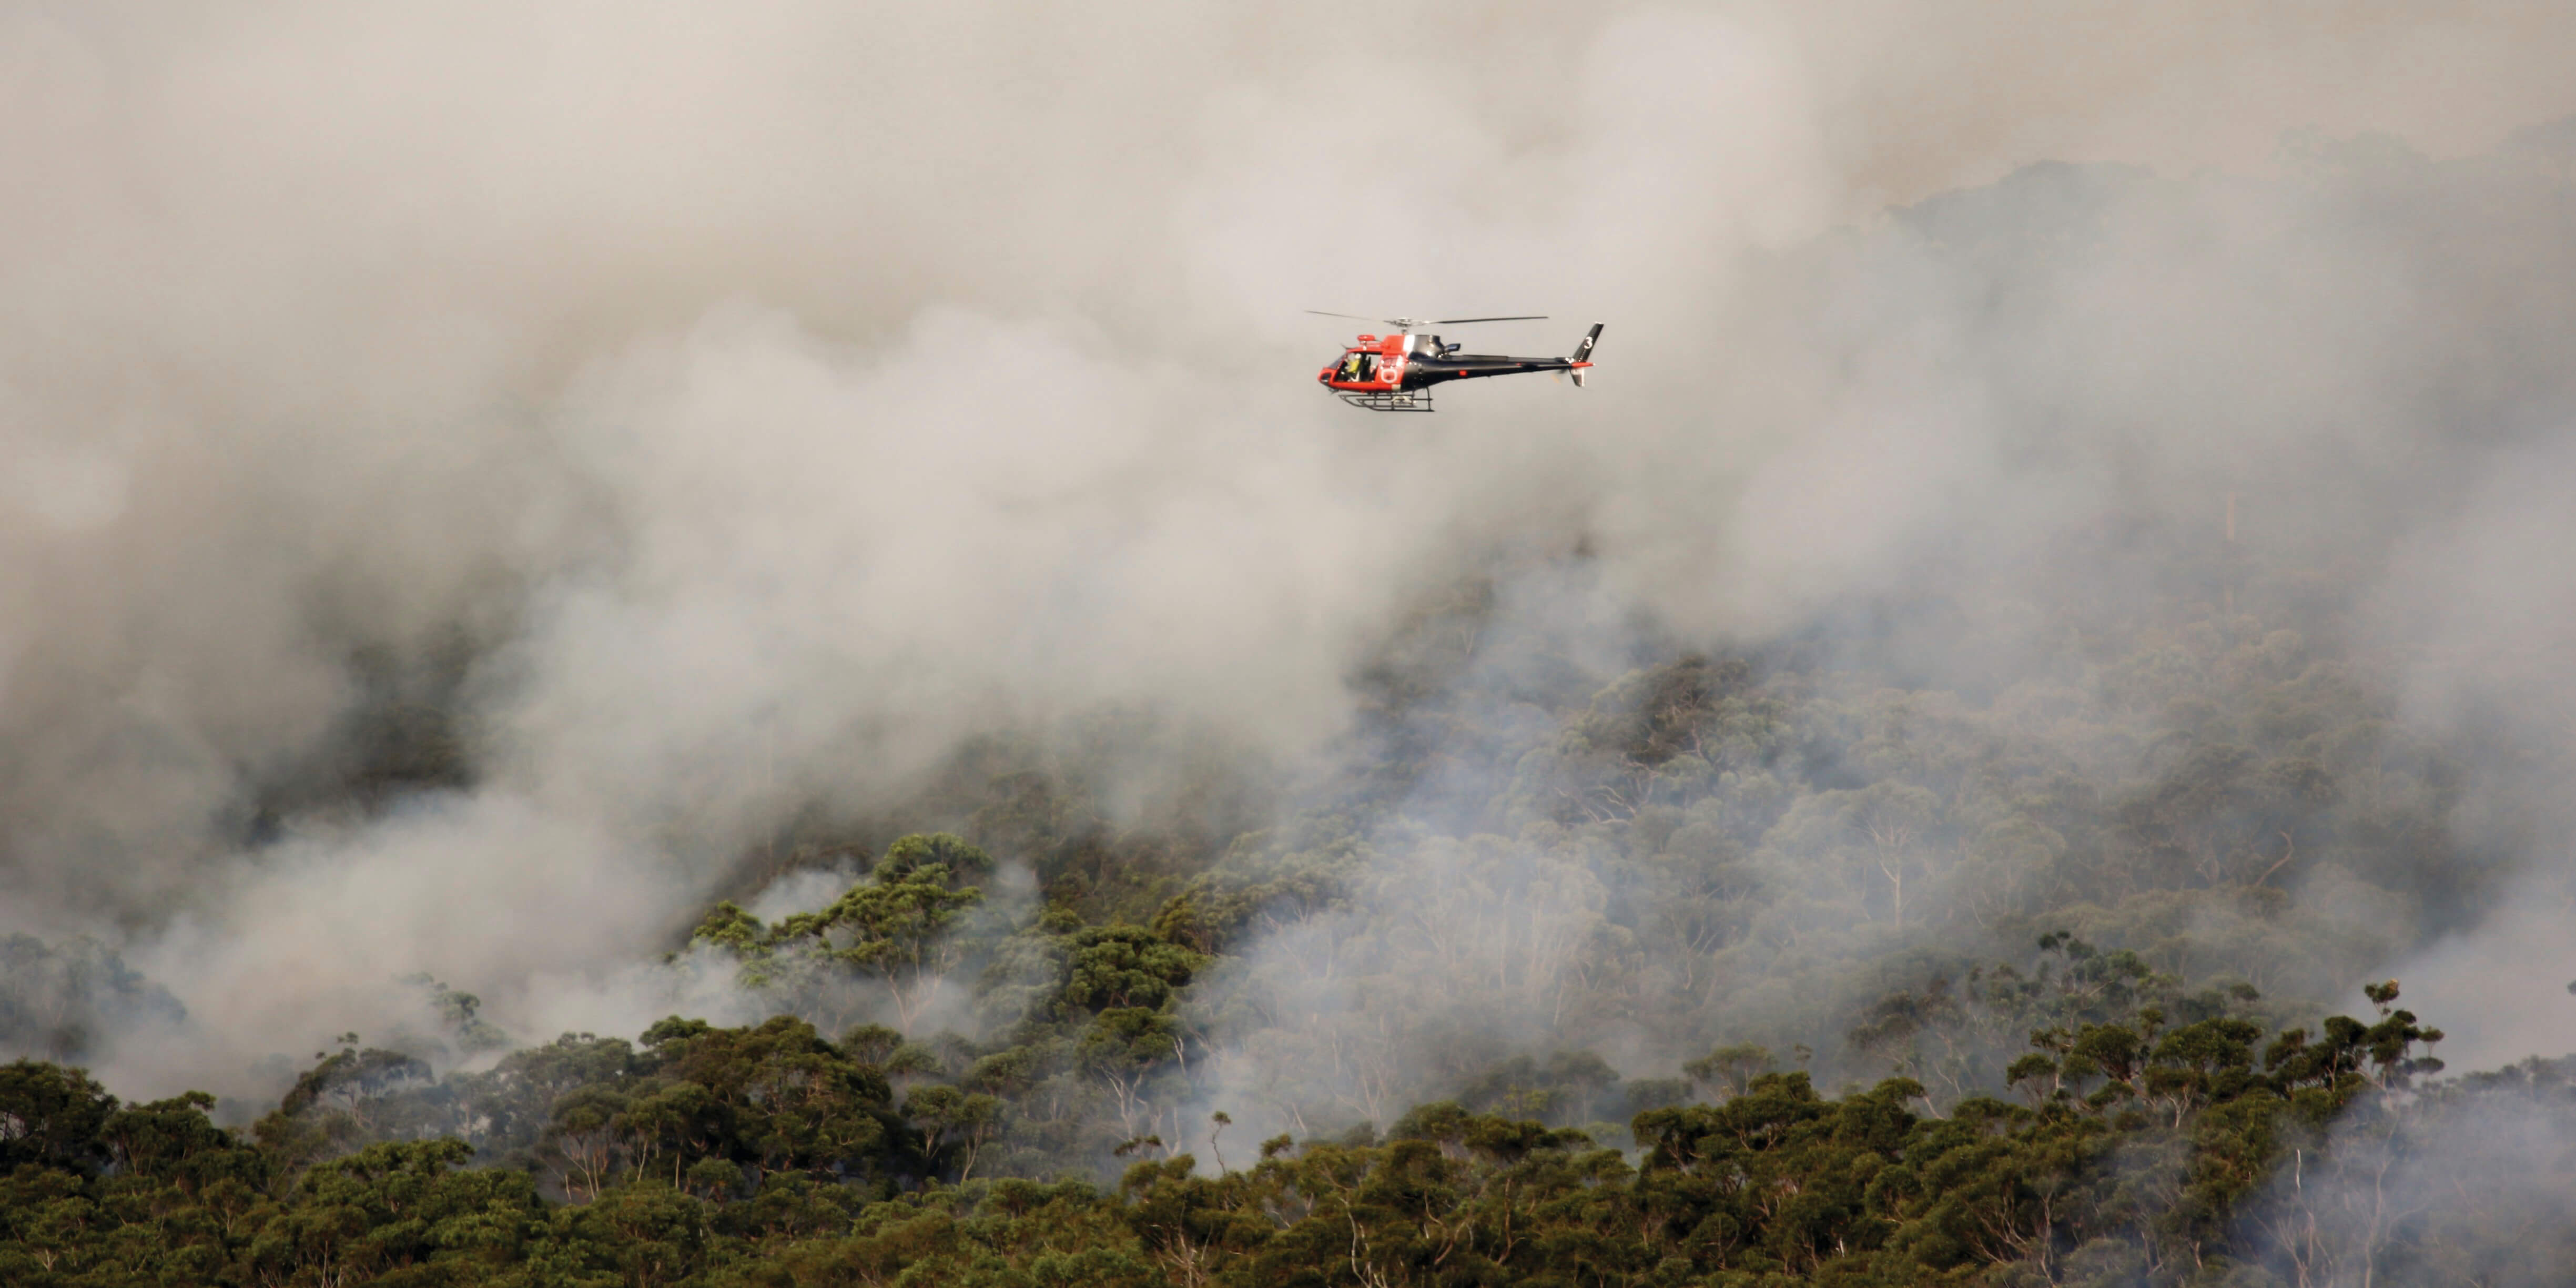 Helicopter flying through the sky - showing smoke and bush